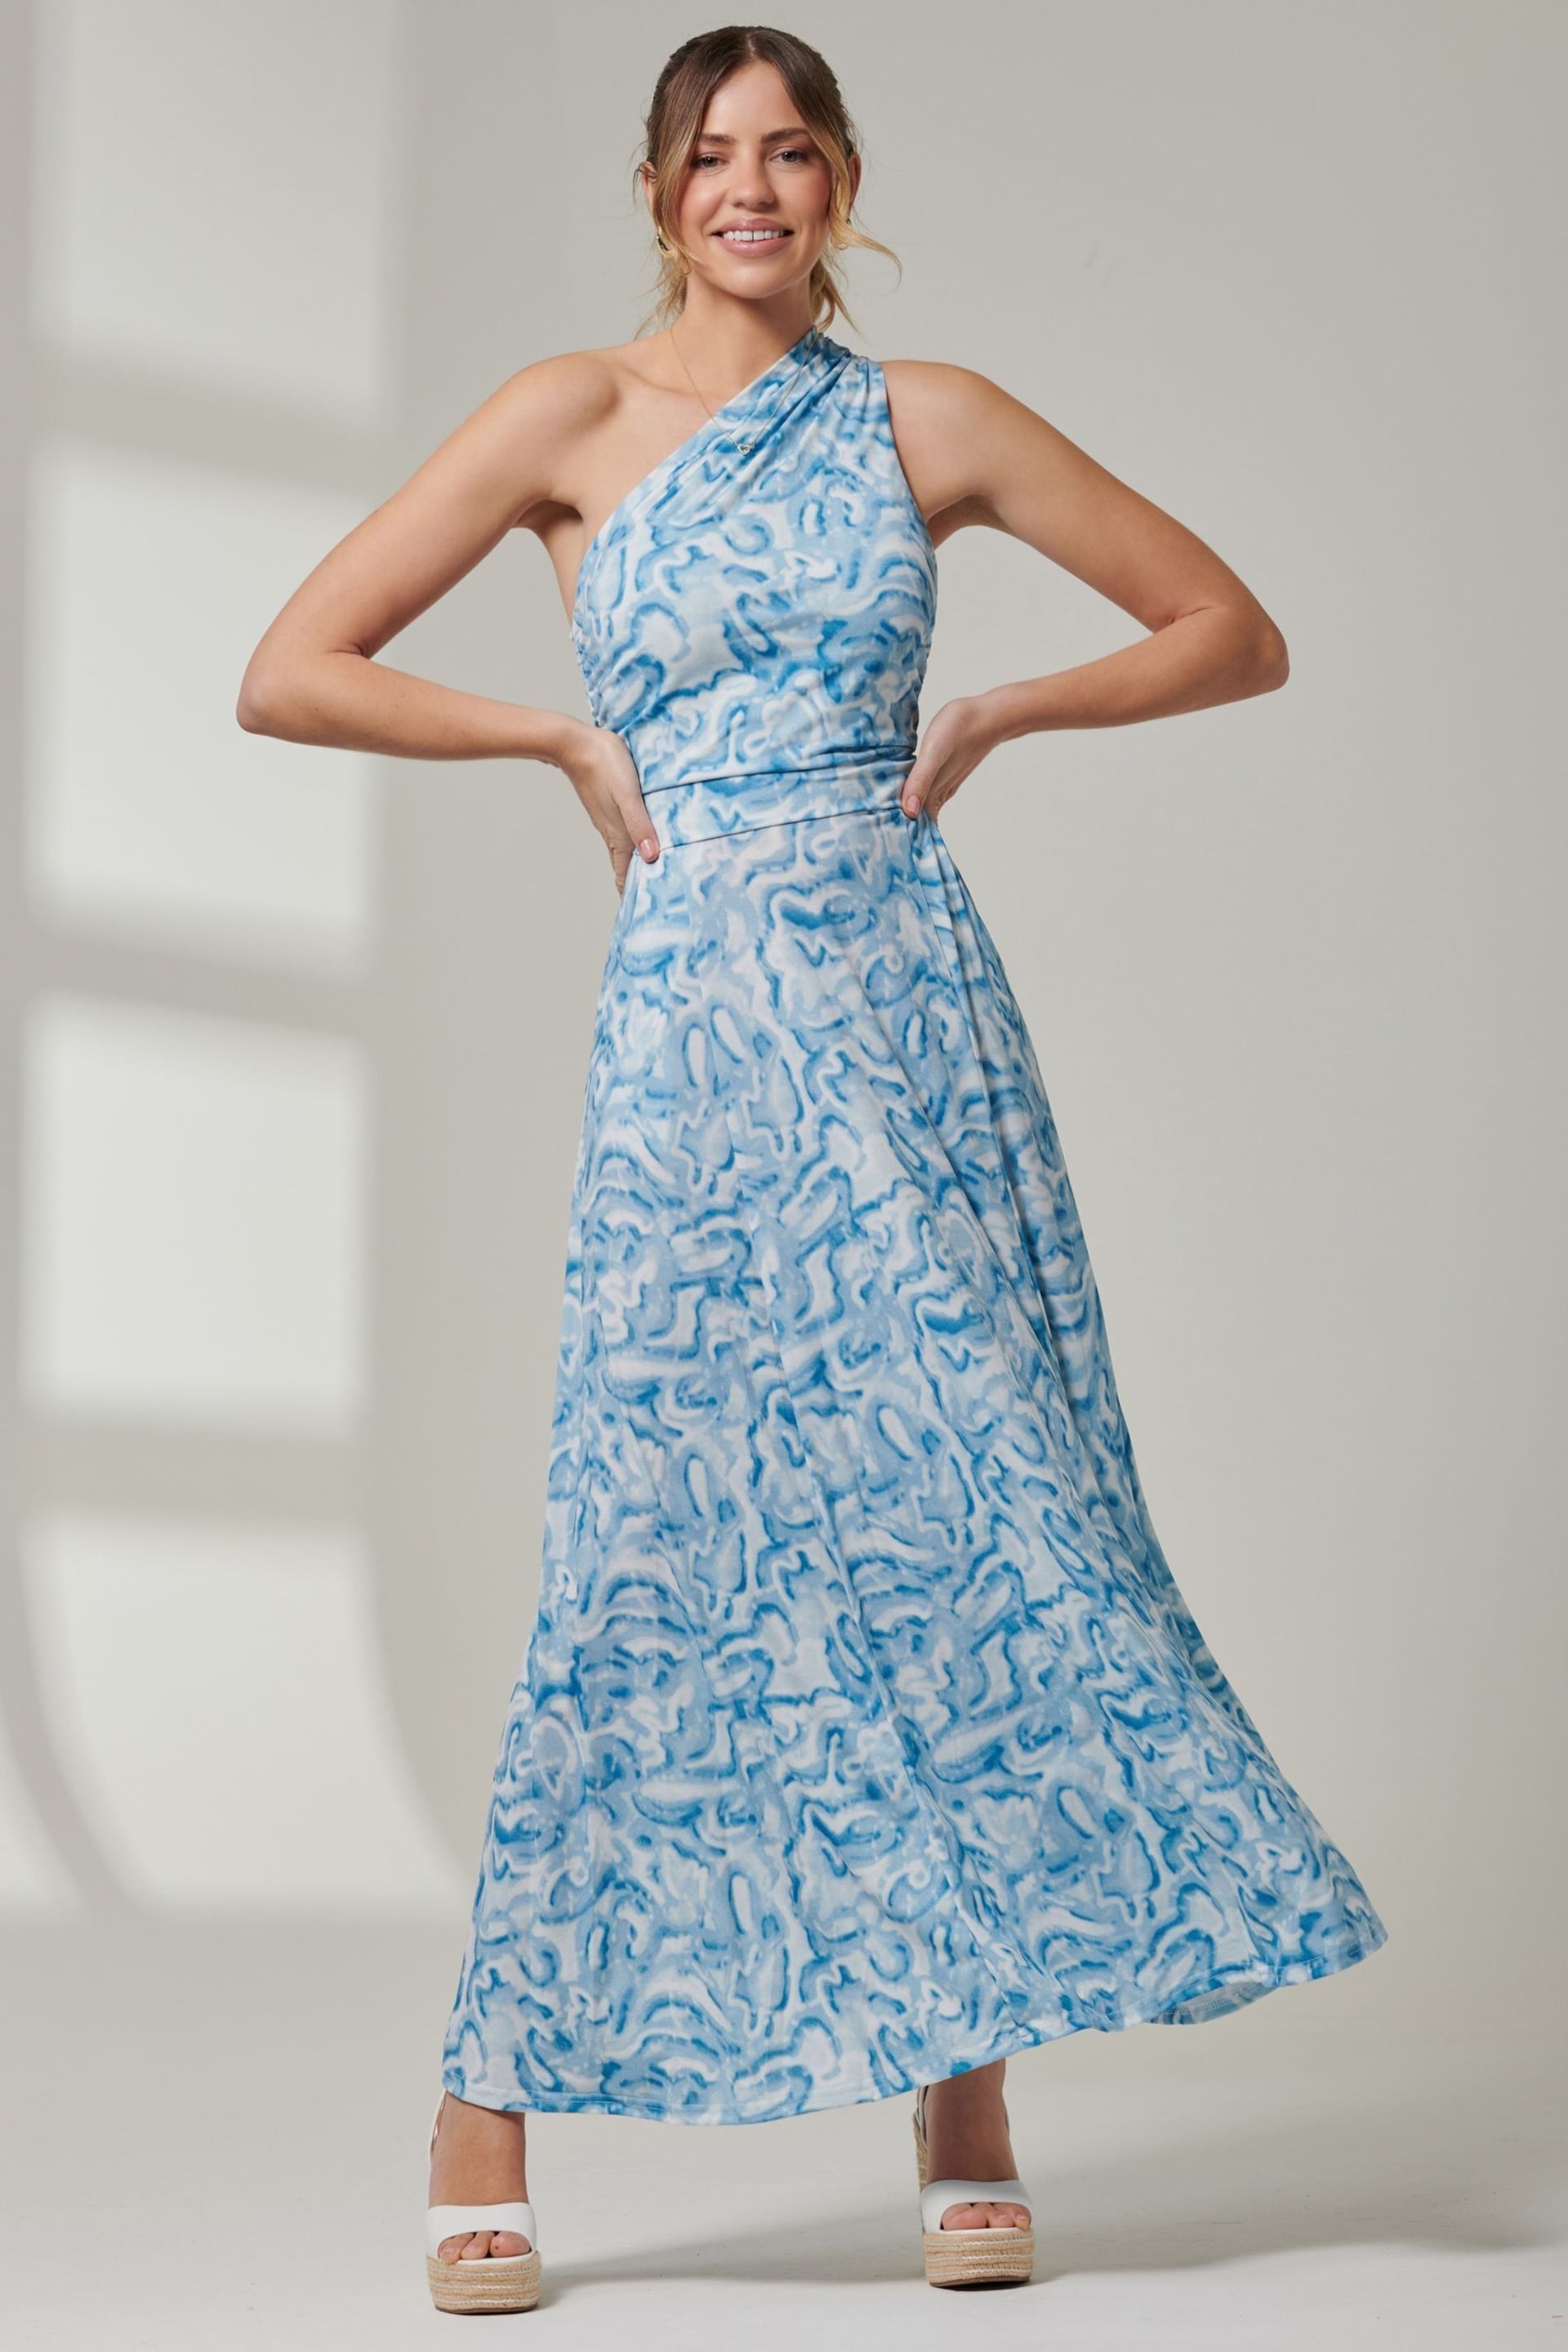 Jolie Moi Blue Abstract Ruched Waist Jersey Maxi Dress - Image 5 of 6